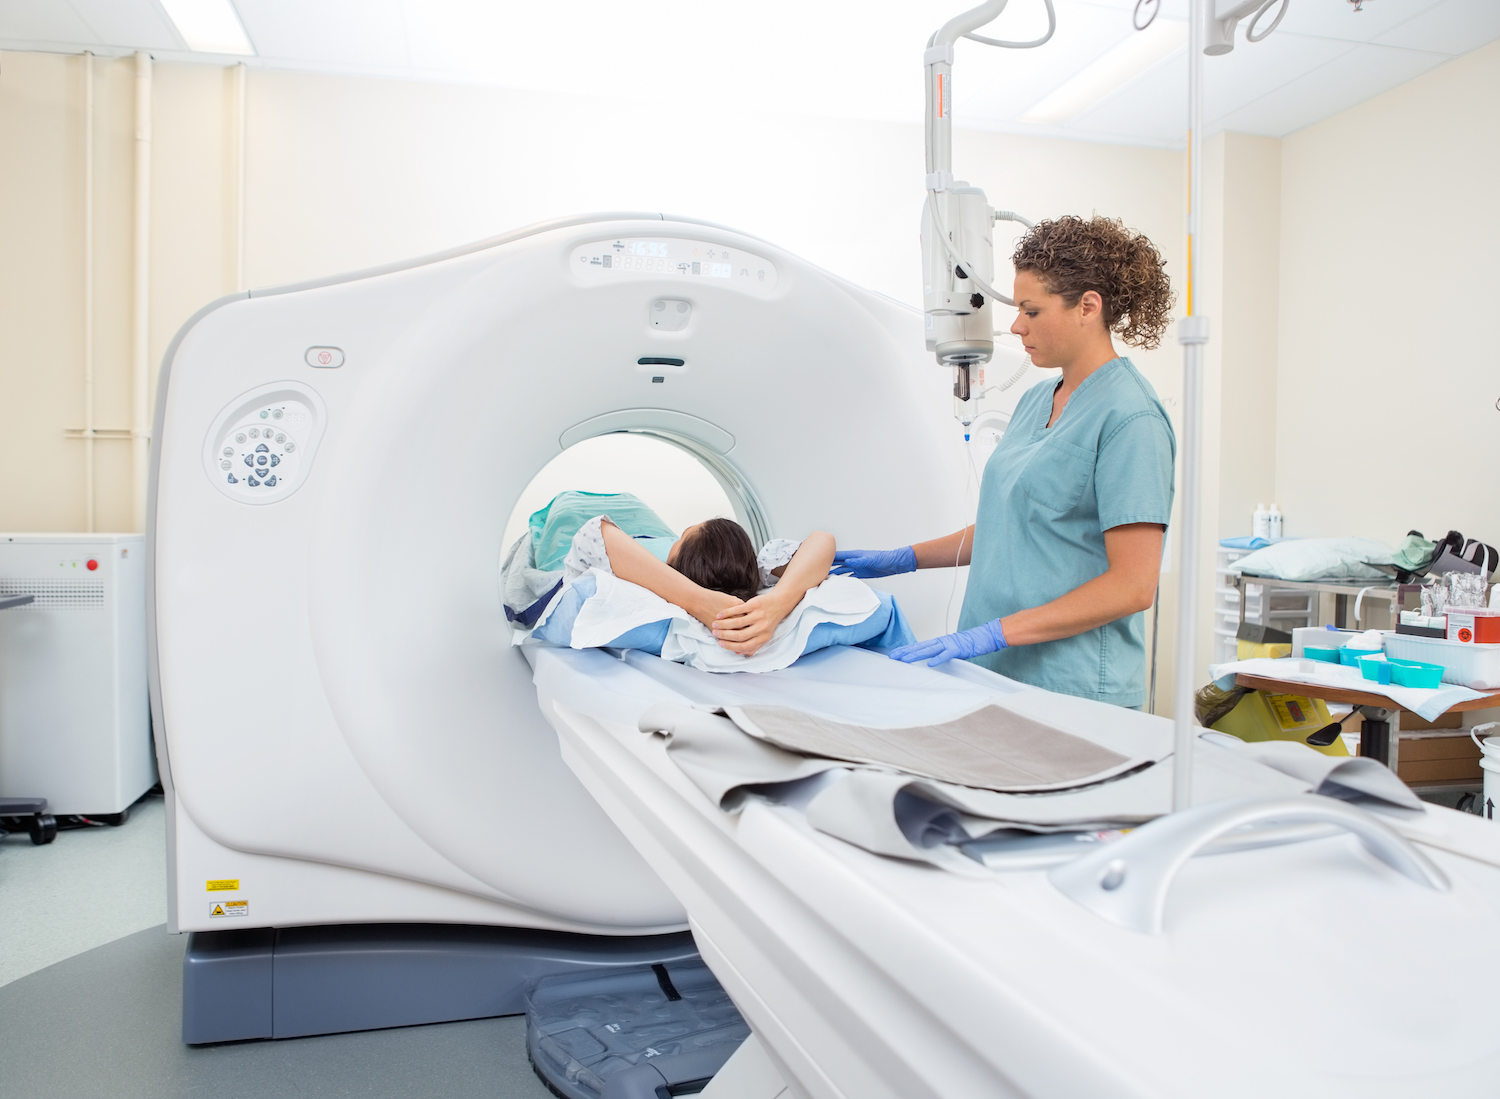 What Are CT Scans and How Do They Work? Live Science